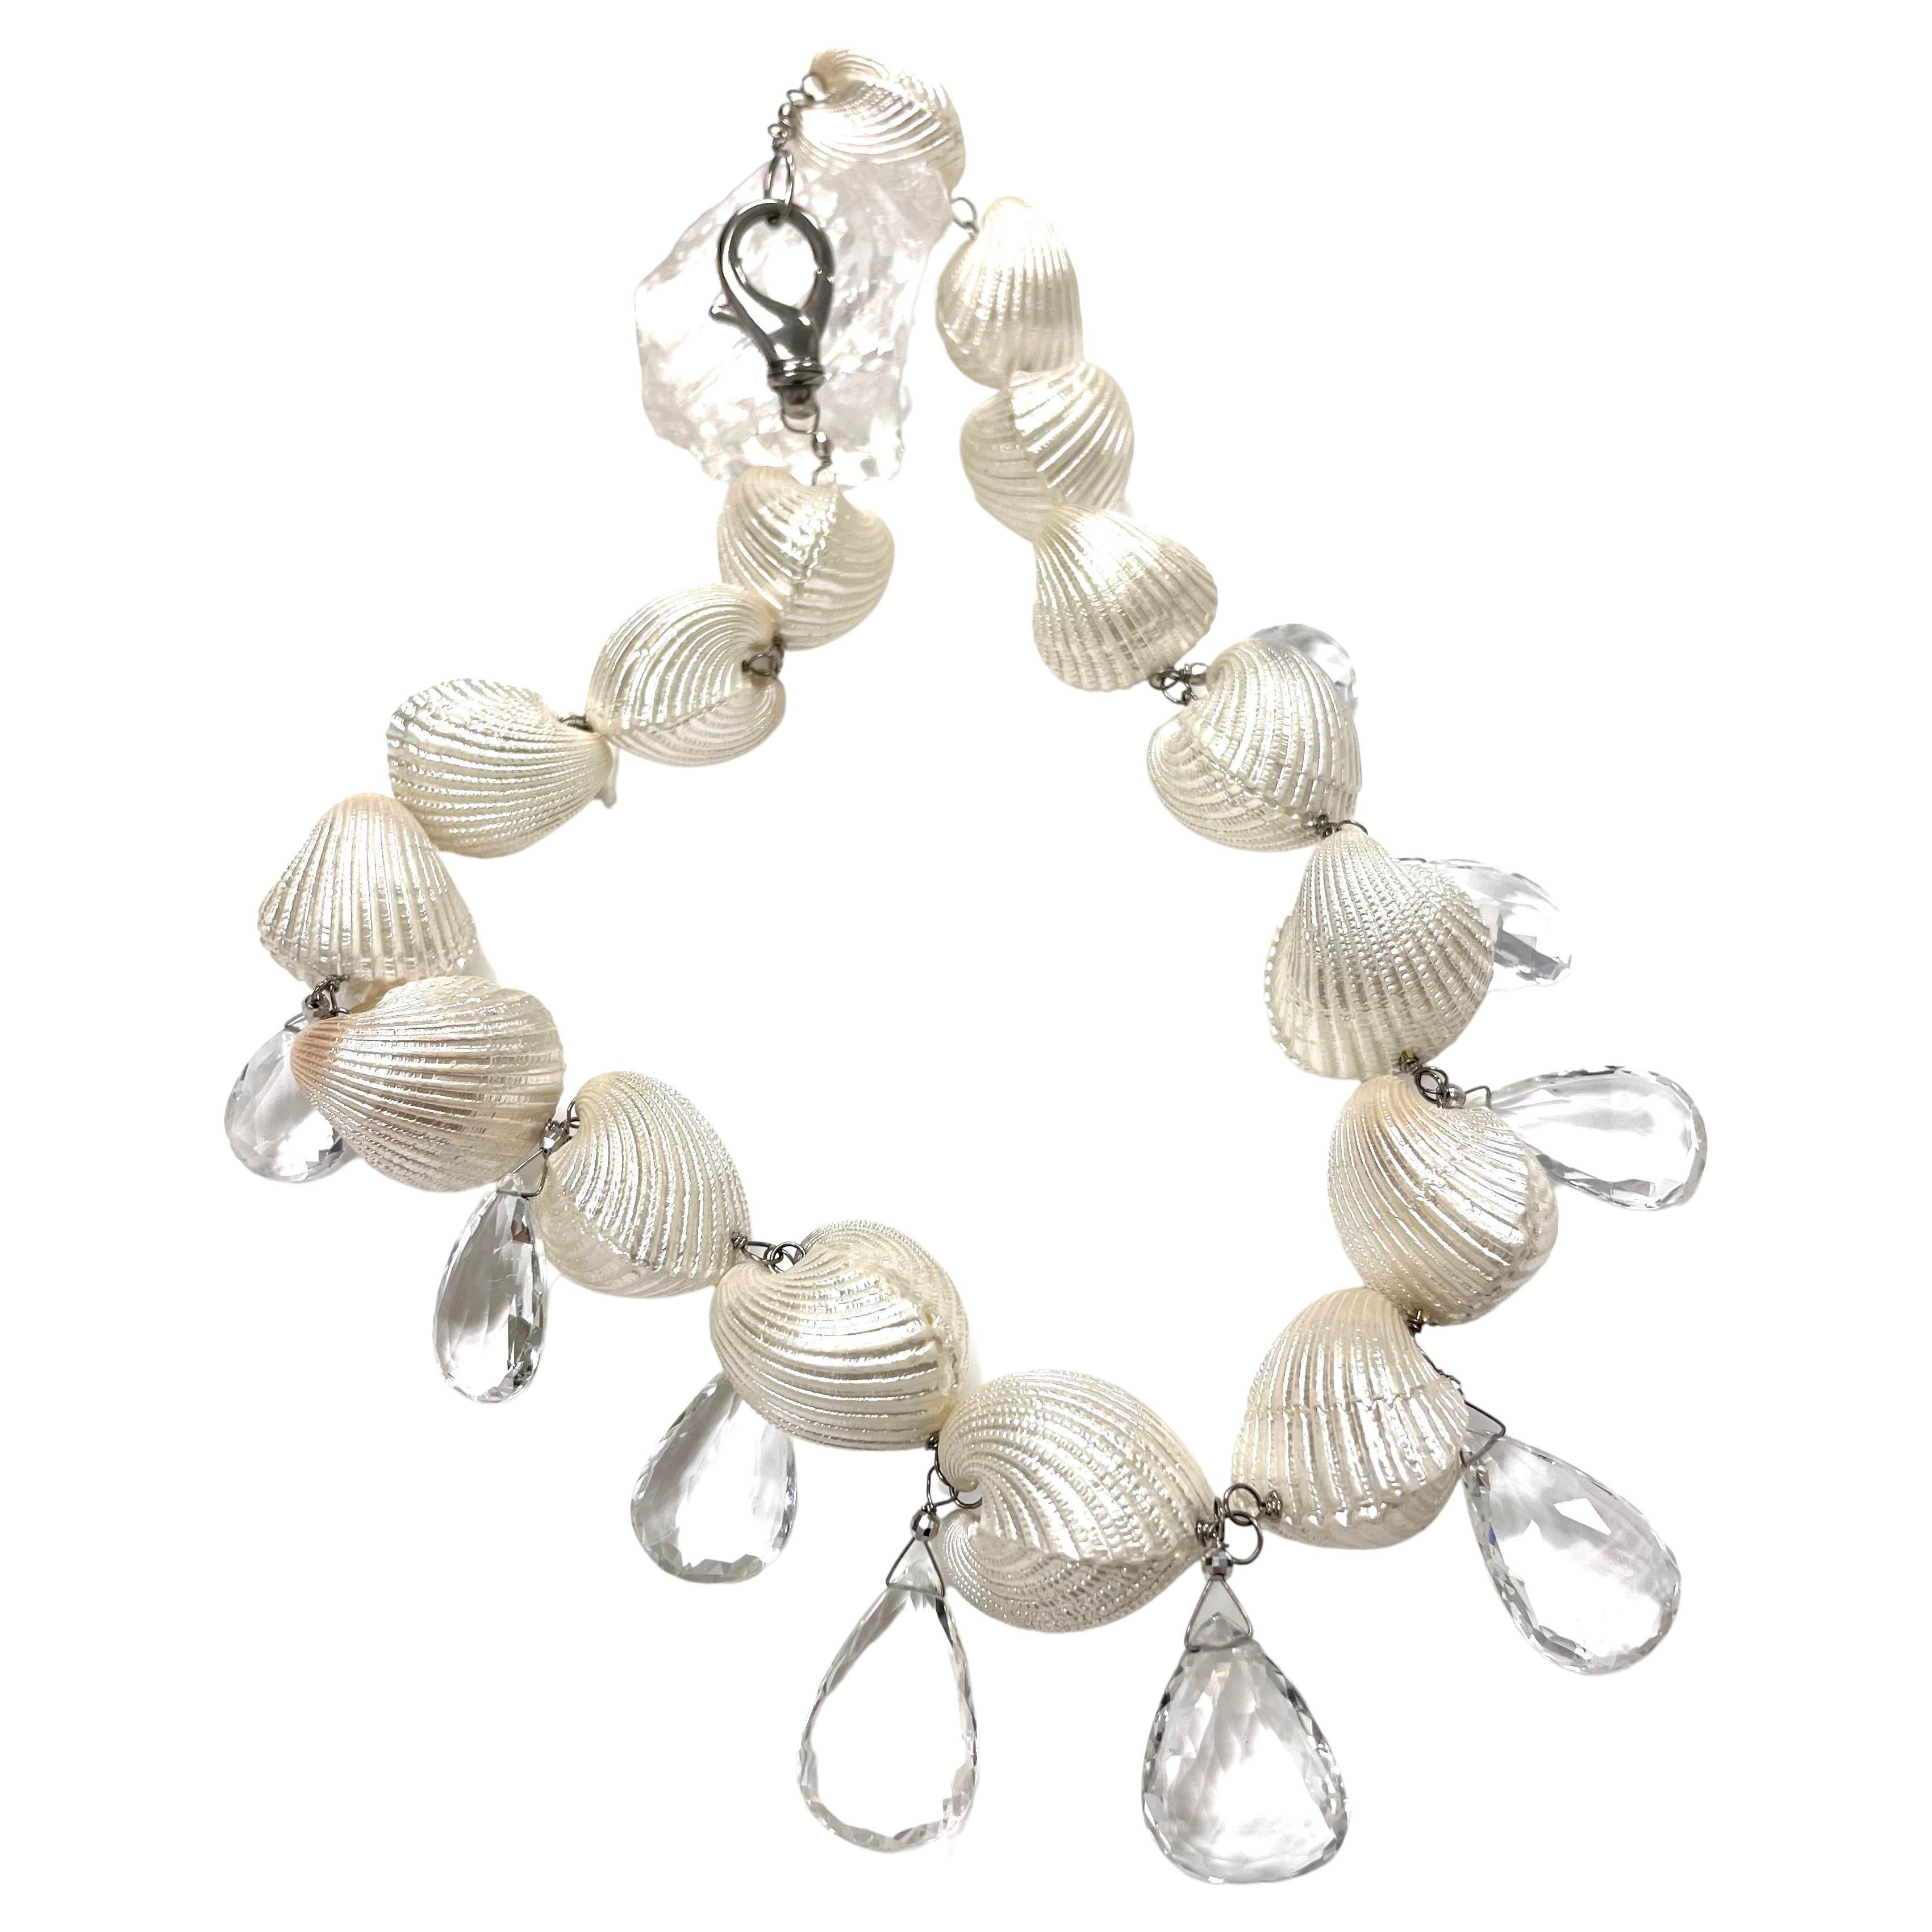 Description
This unique, striking and delightful statement necklace expresses your own personal summer flair. An uncommon mix of beautifully lacquered Caribbean Ark shells with large, elegant and rare white topaz drops, makes this necklace a must